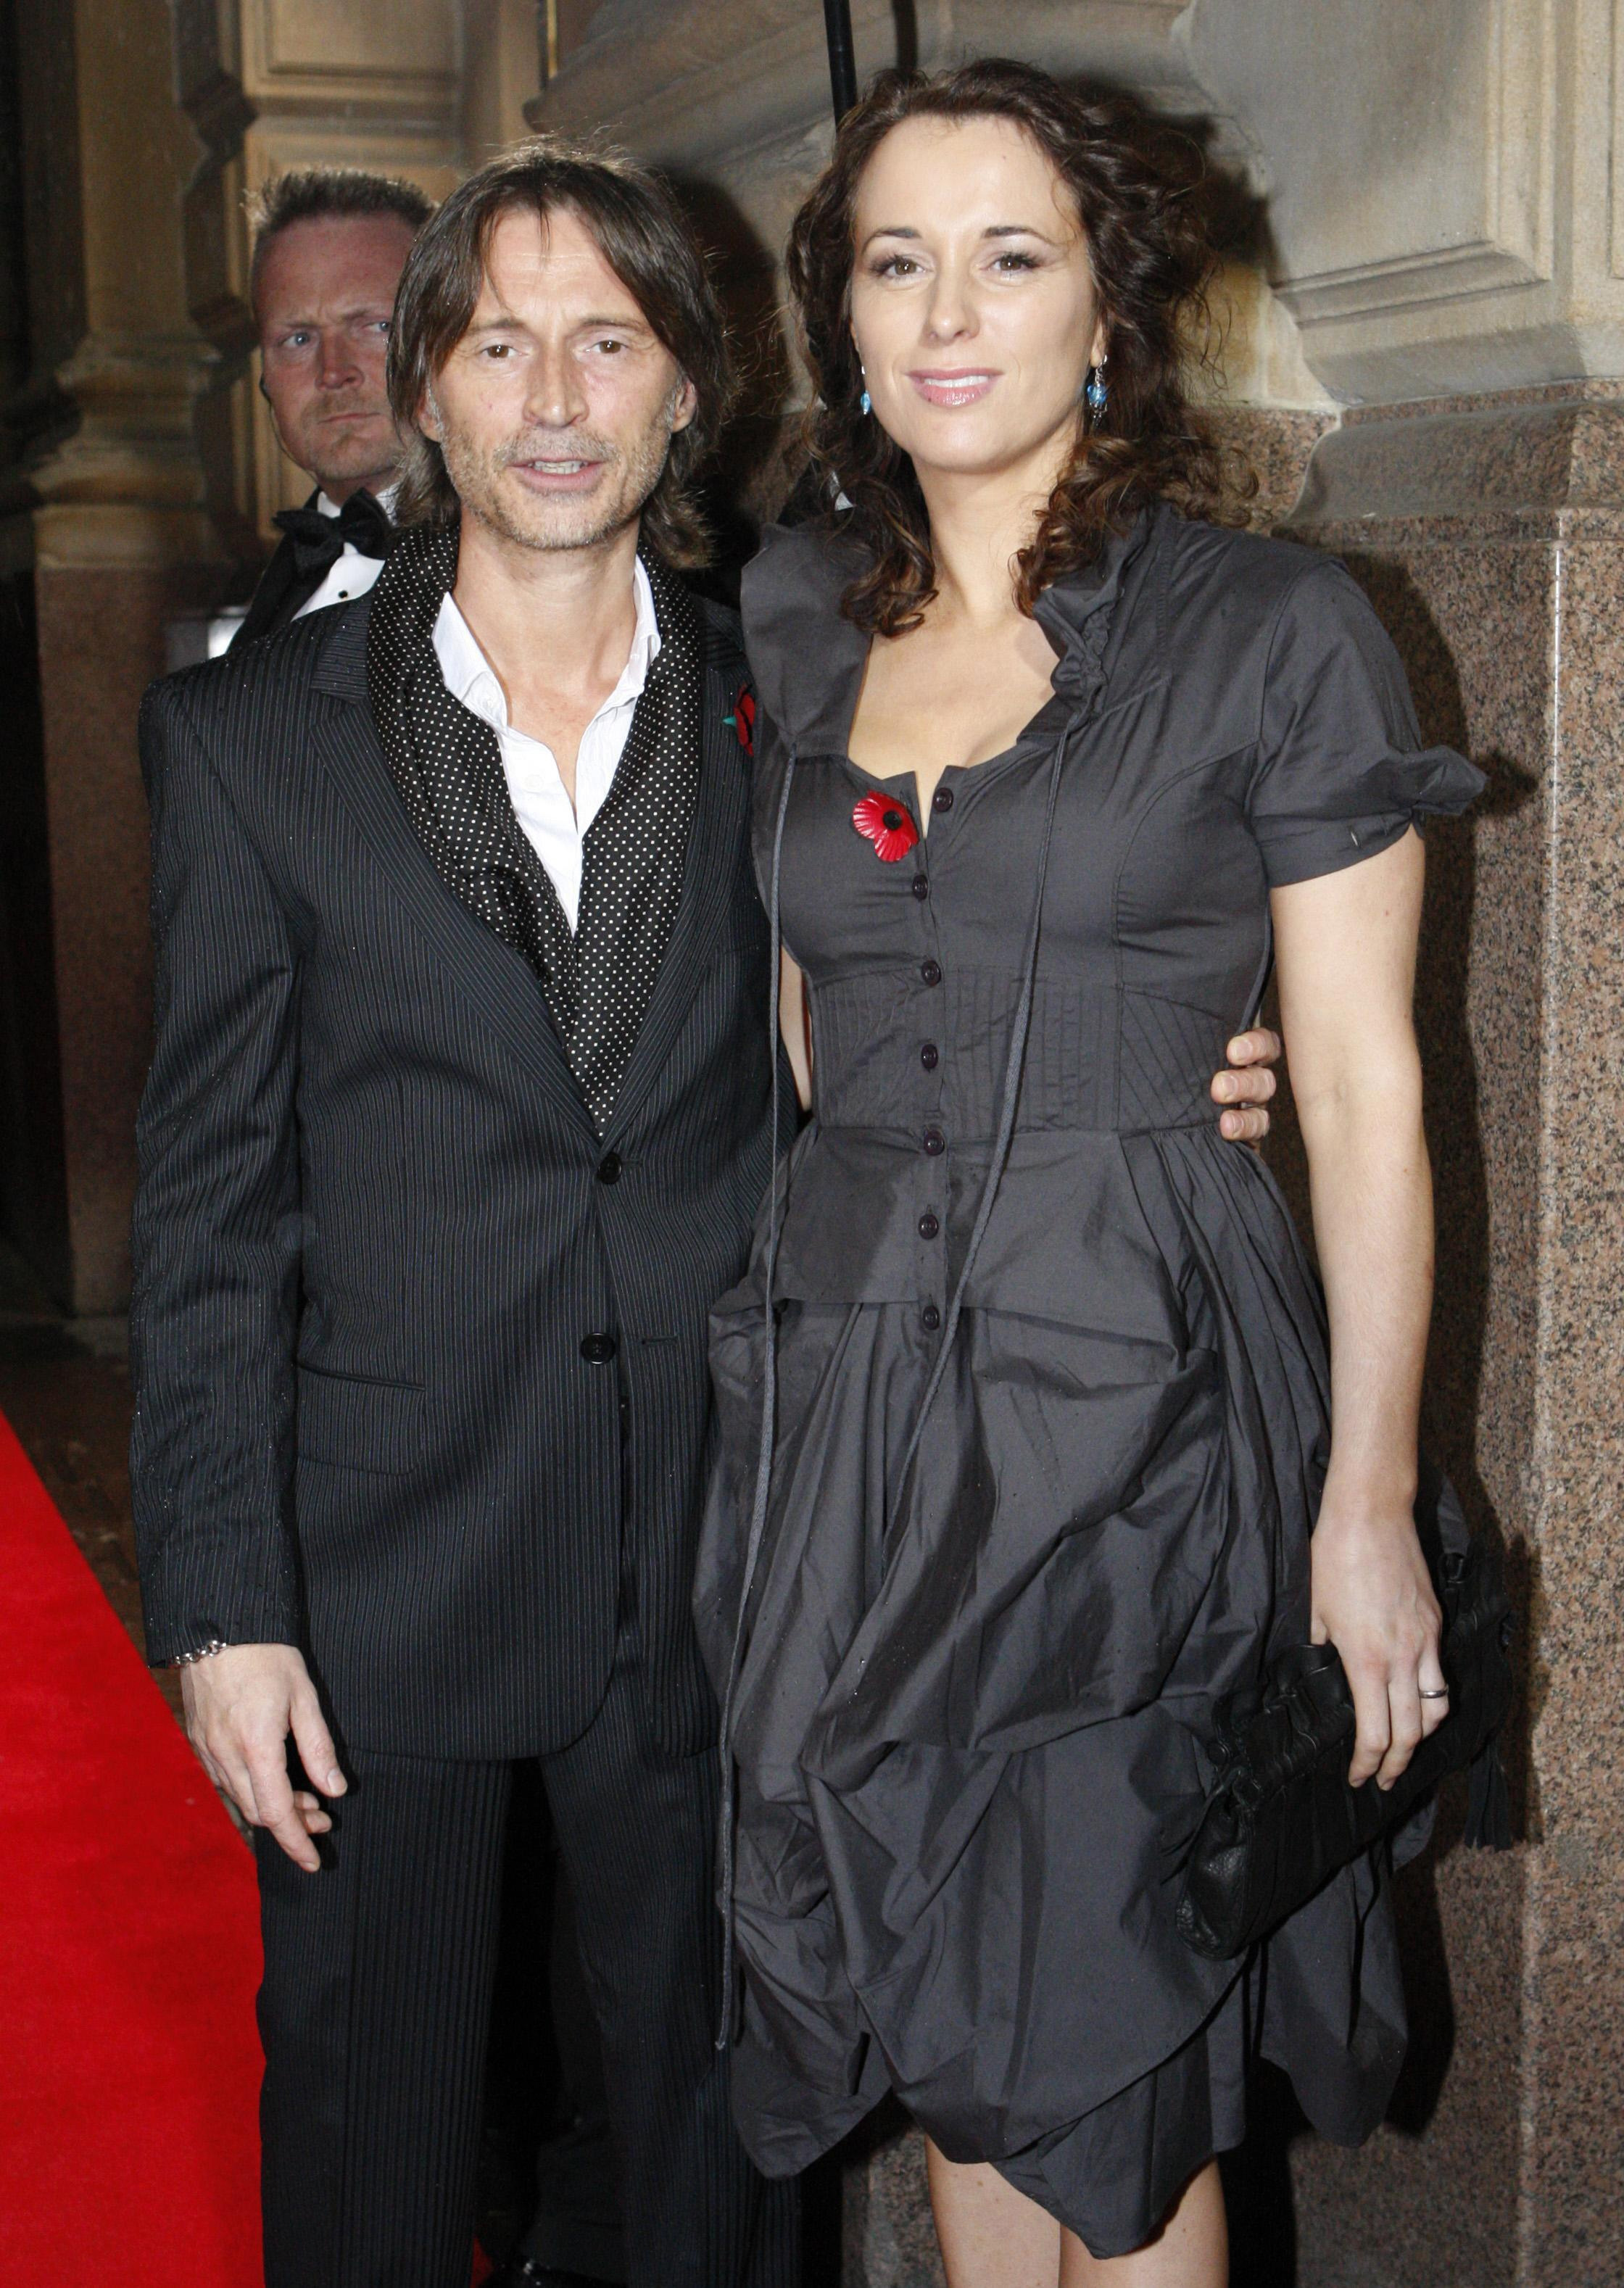 Robert Carlyle and Anastasia Shirley at the Bafta Scotland Awards on November 9, 2008, in  Glasgow, Scotland. | Source: Getty Images